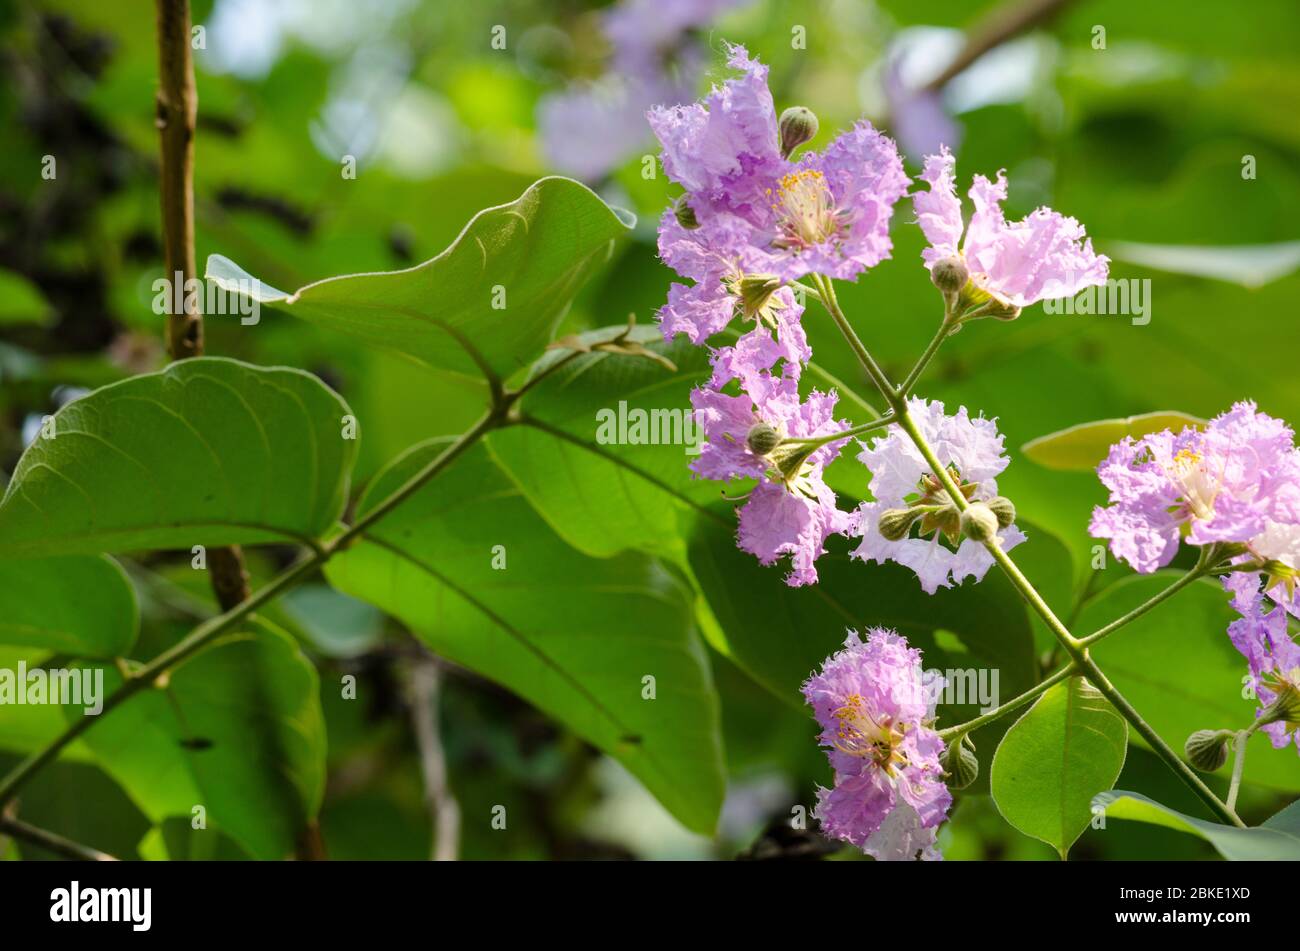 Lagerstroemia calyculata  is derived from its very characteristic mottled flaky bark. It is a species of flowering plant in the Lythraceae family and Stock Photo